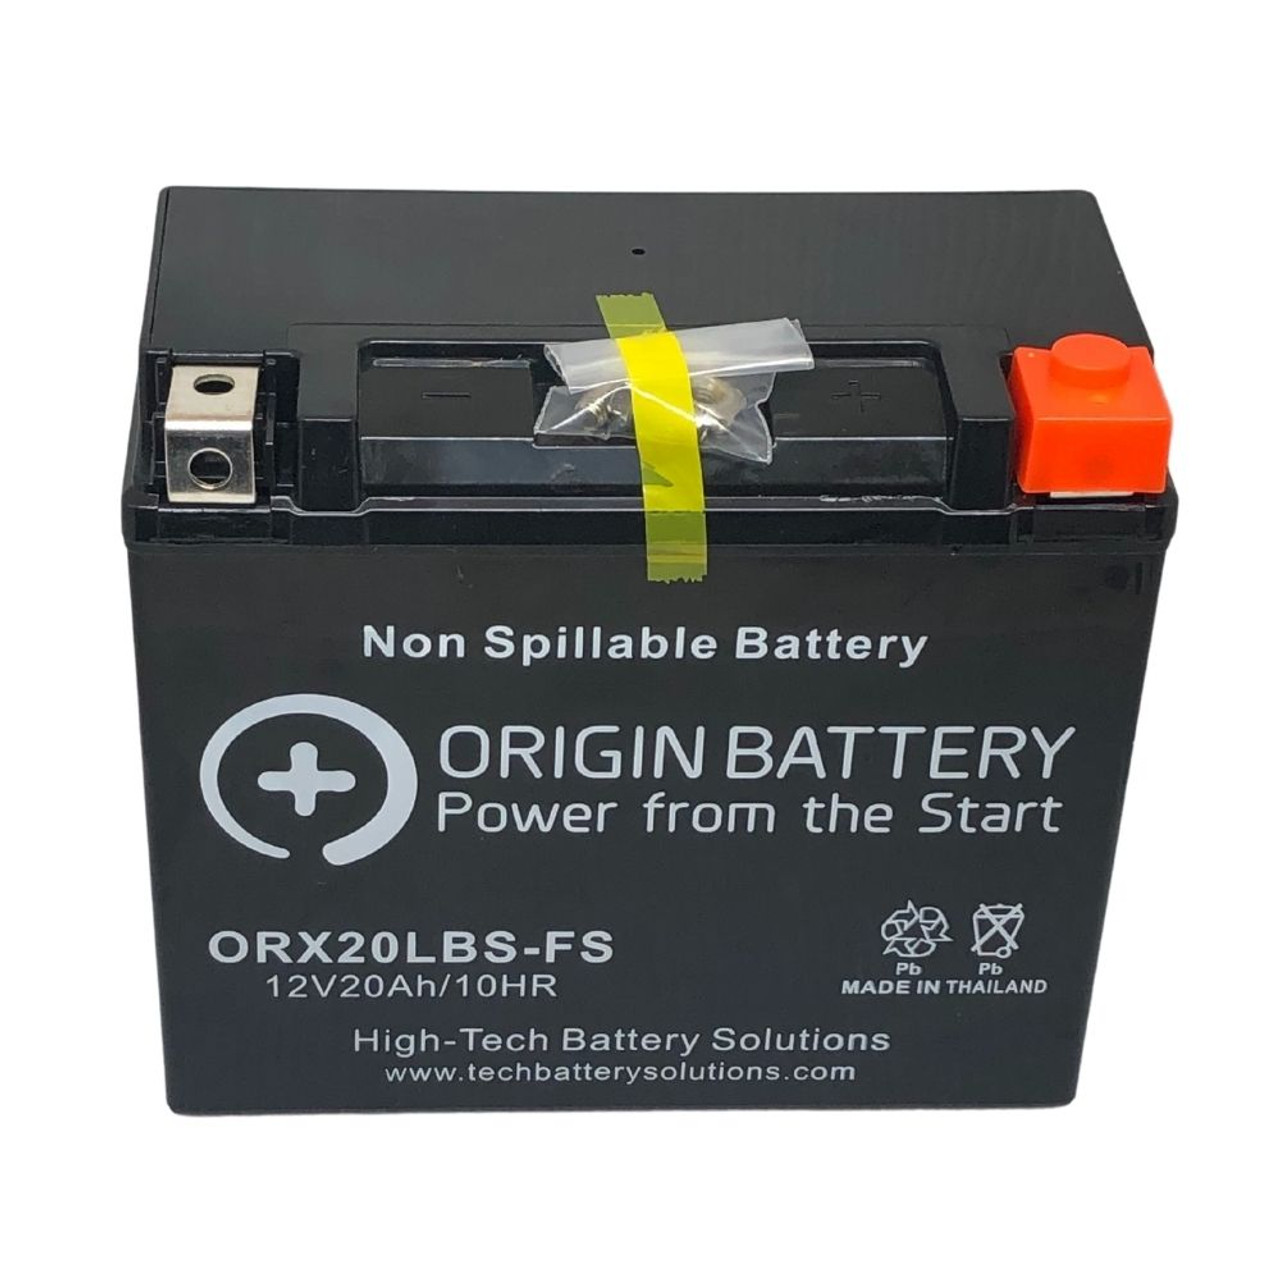 BRP - Sea Doo Spark Battery Replacement ('14-'20)